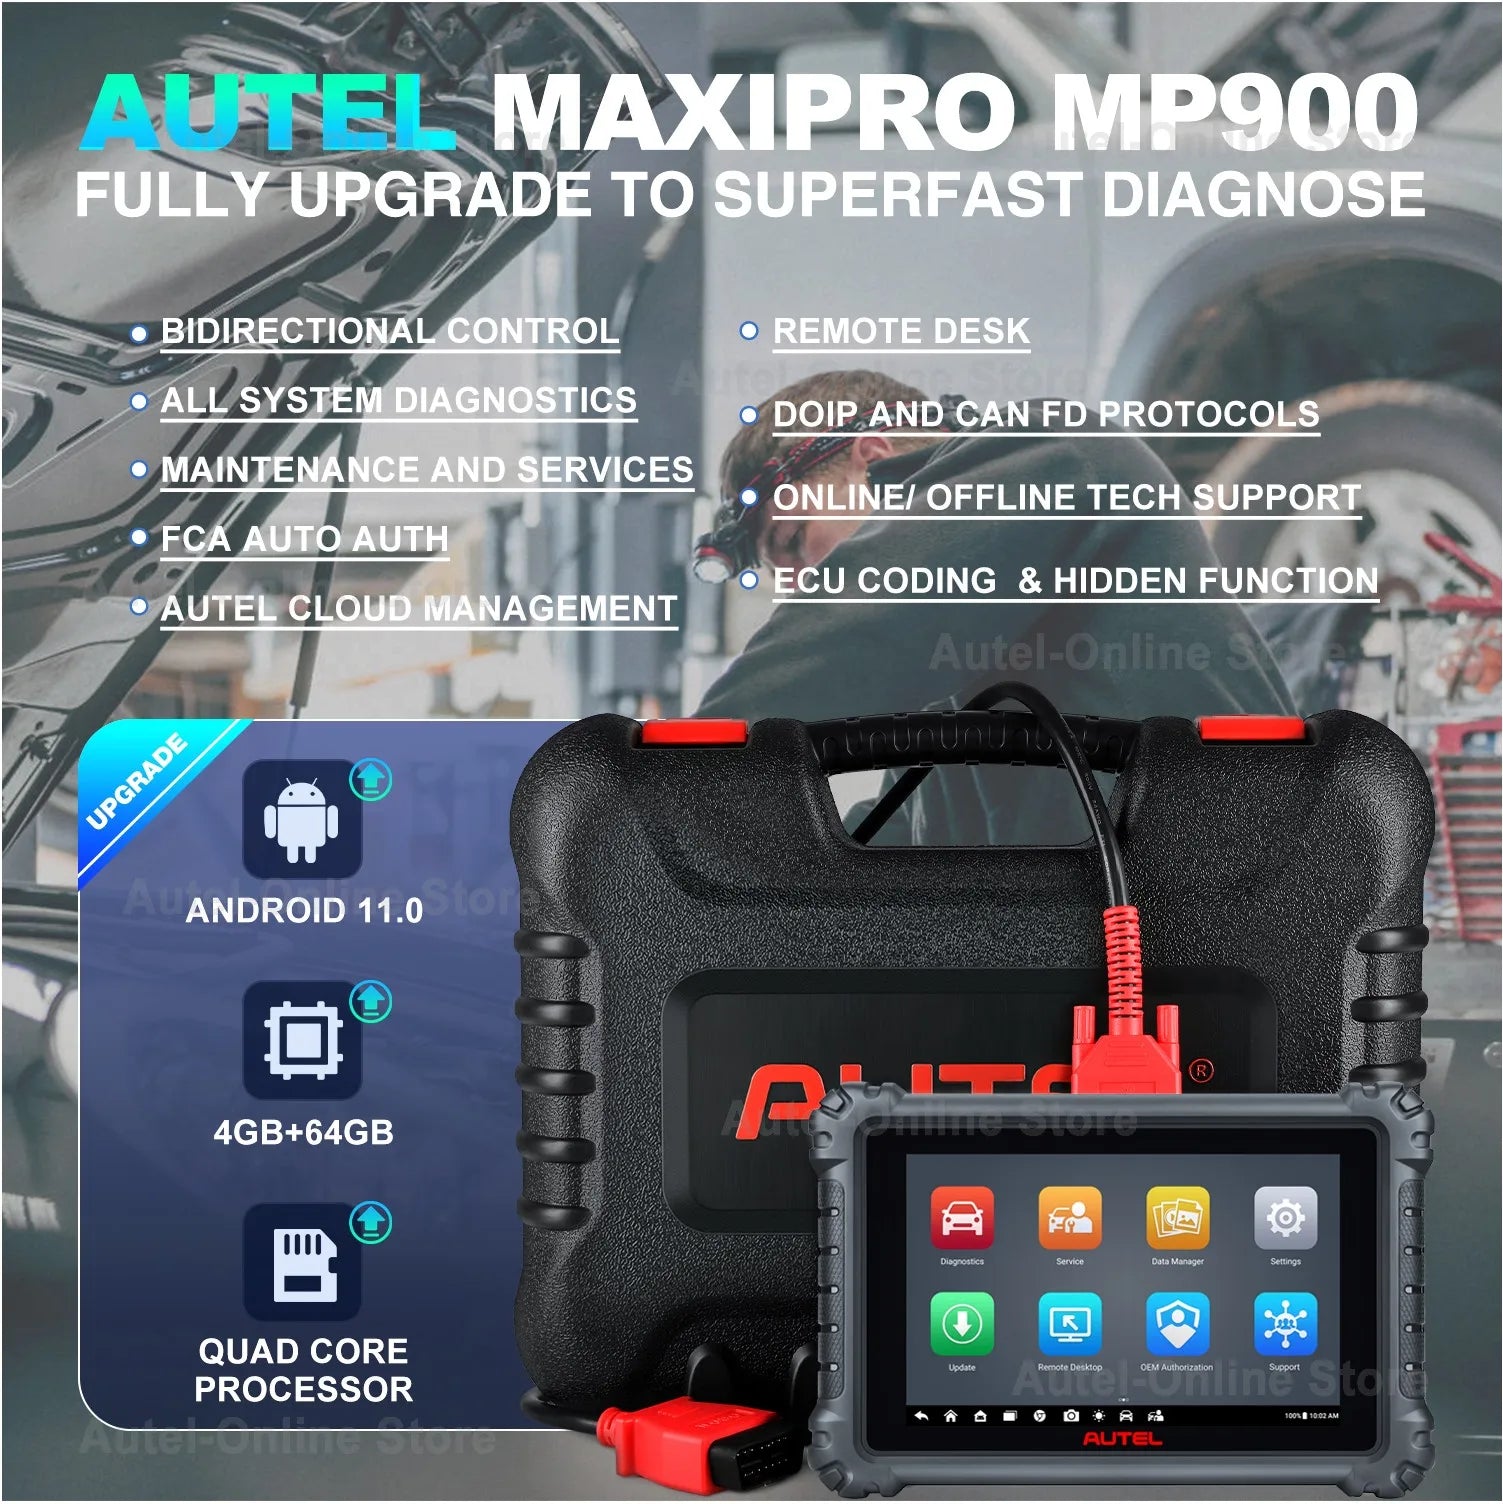 Autel MaxiPro MP900 Diagnostic Scanner CAN FD & DoIP Scan Tool Supports ECU Coding, Refresh Hidden, OBD2 All System Diagnostic - Dynamex